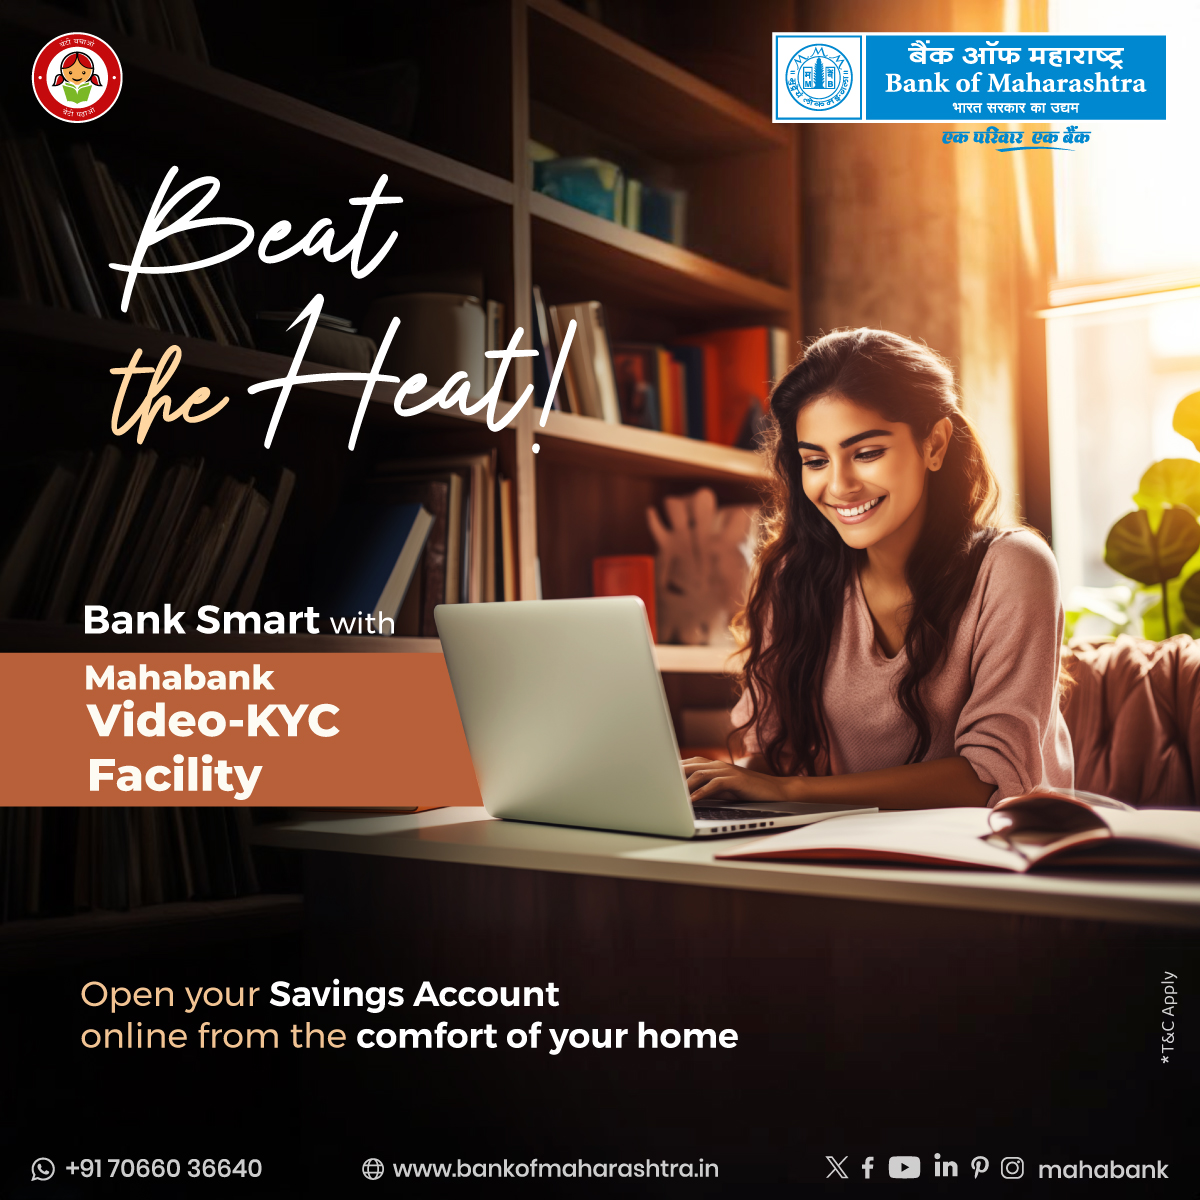 Beat the heat this summer by banking smart with #Mahabank's #VideoKYC! Open your savings account online from the comfort of your home. Skip the branch visits and enjoy hassle-free banking with our easy and convenient Video KYC service. 

know more: bit.ly/BoM-VCIP